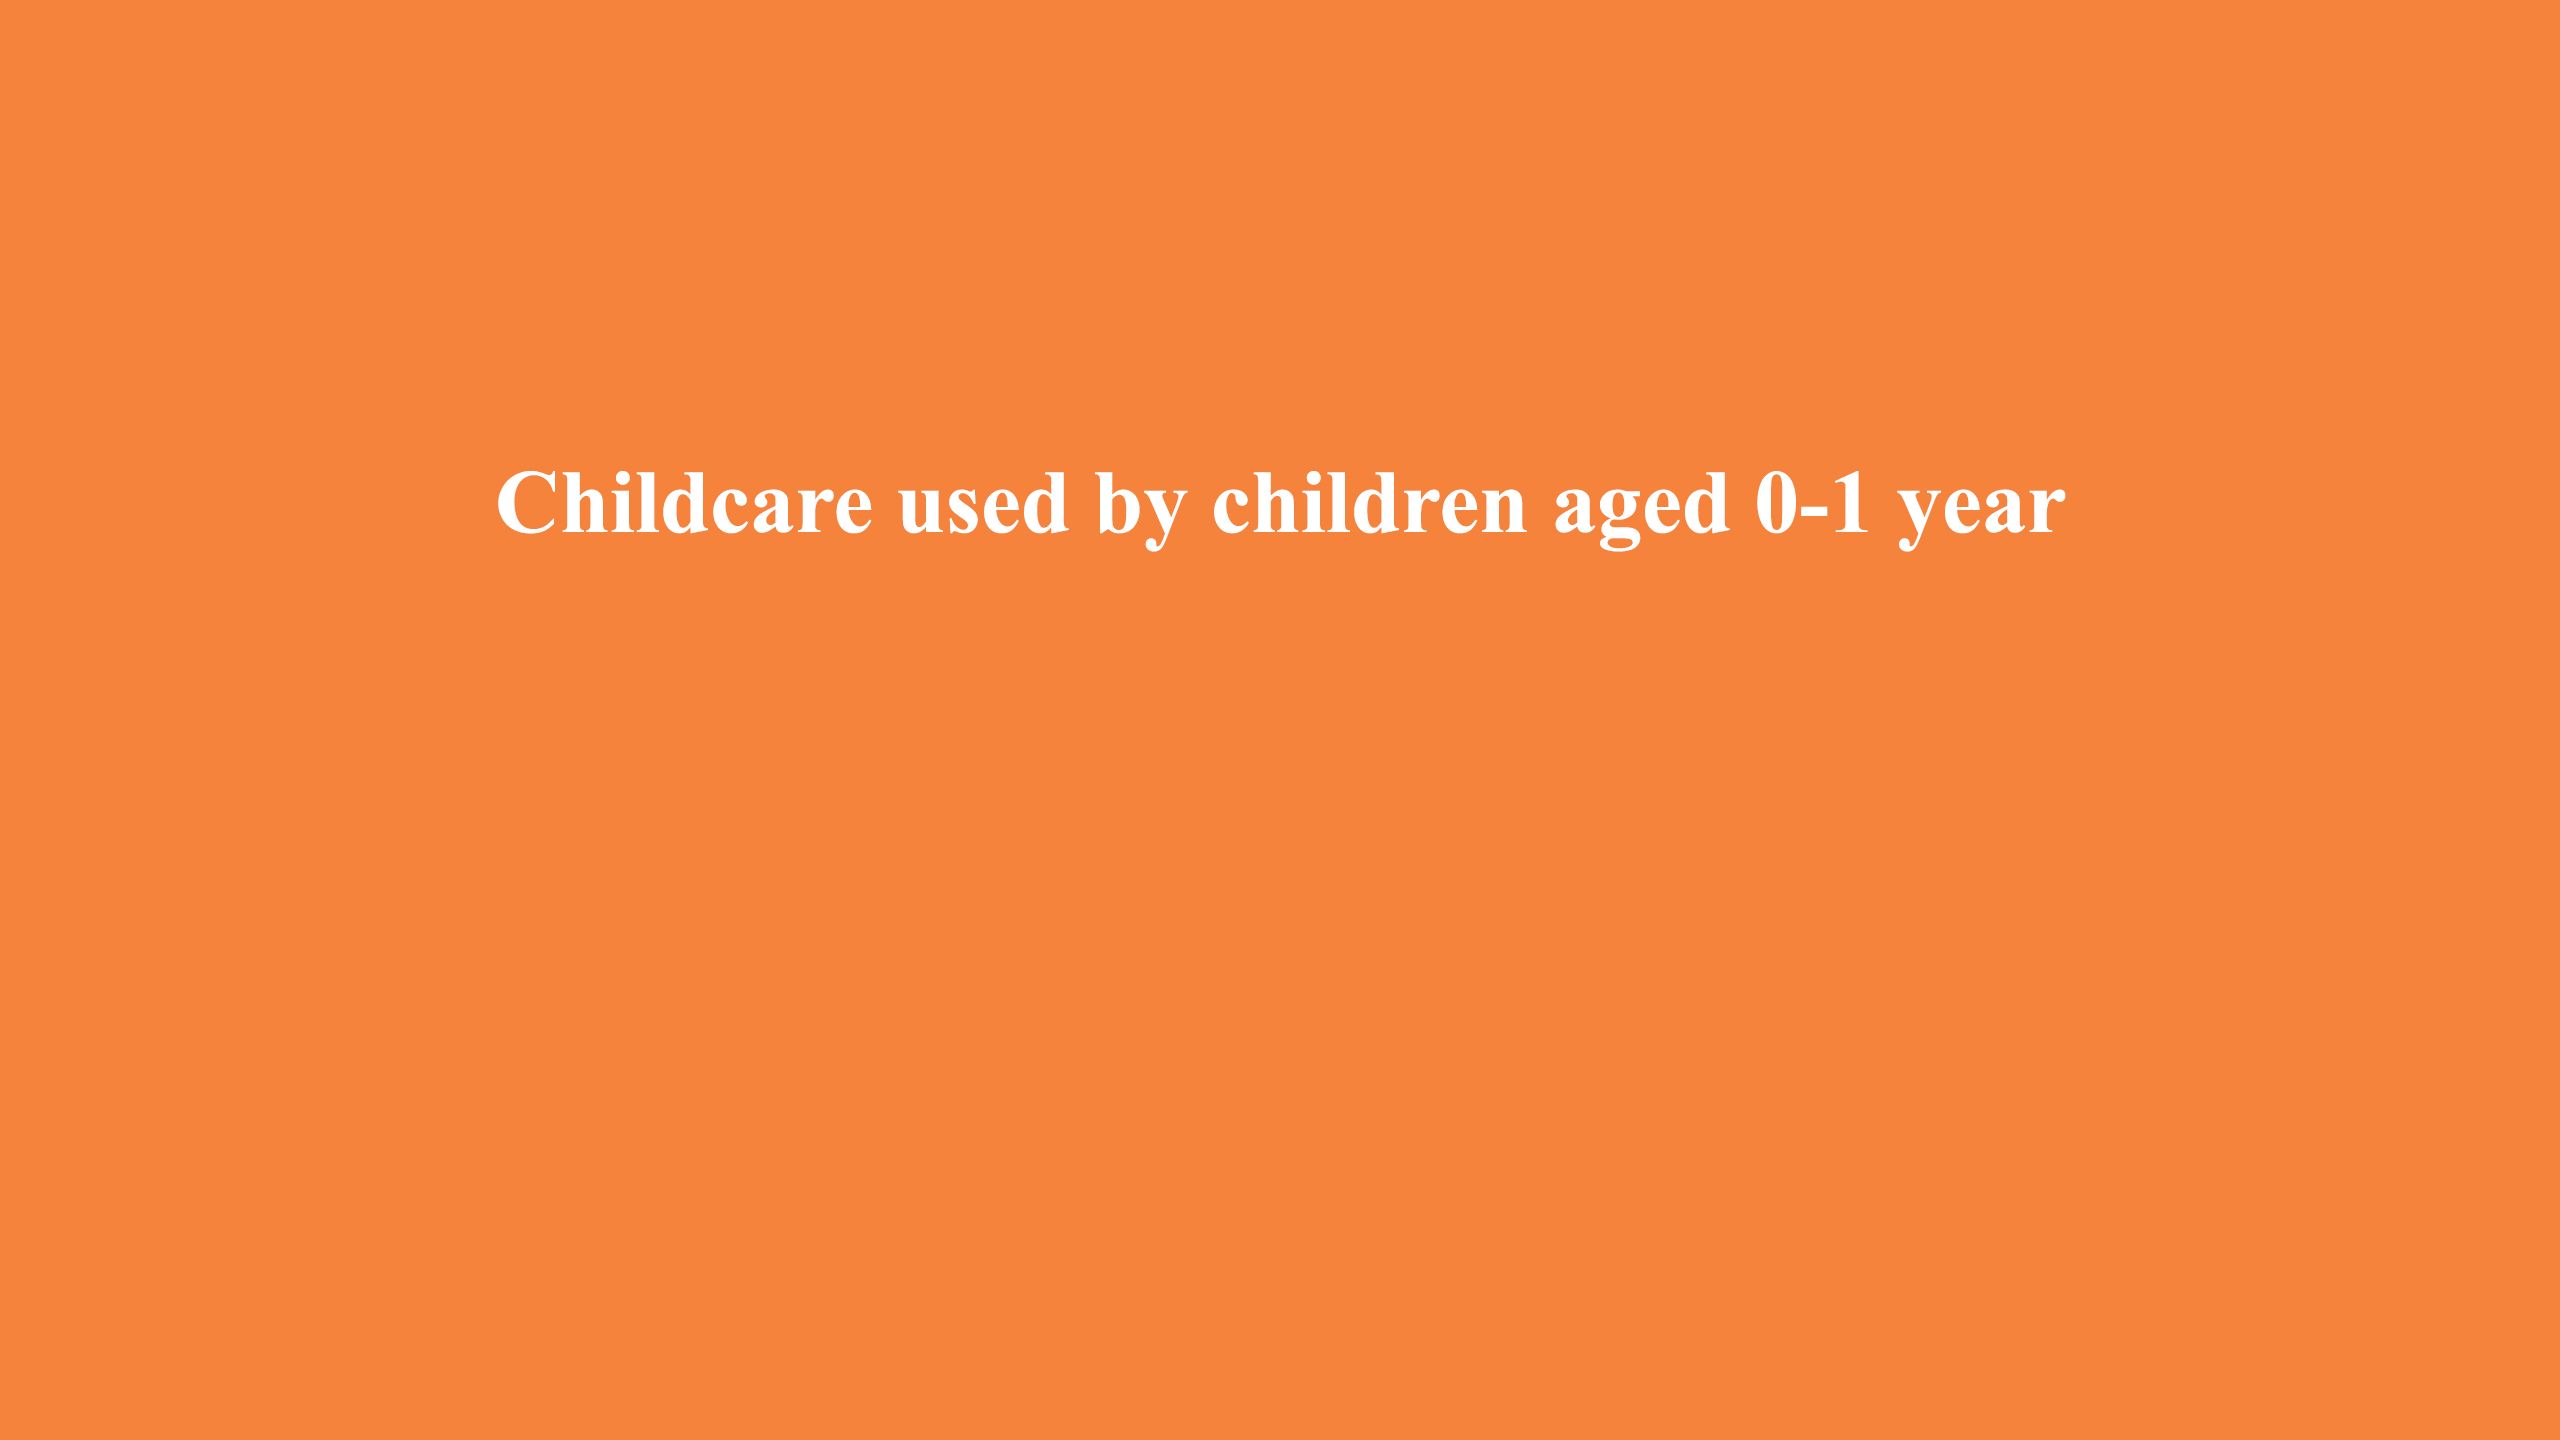 Childcare used by children aged 0-1 year